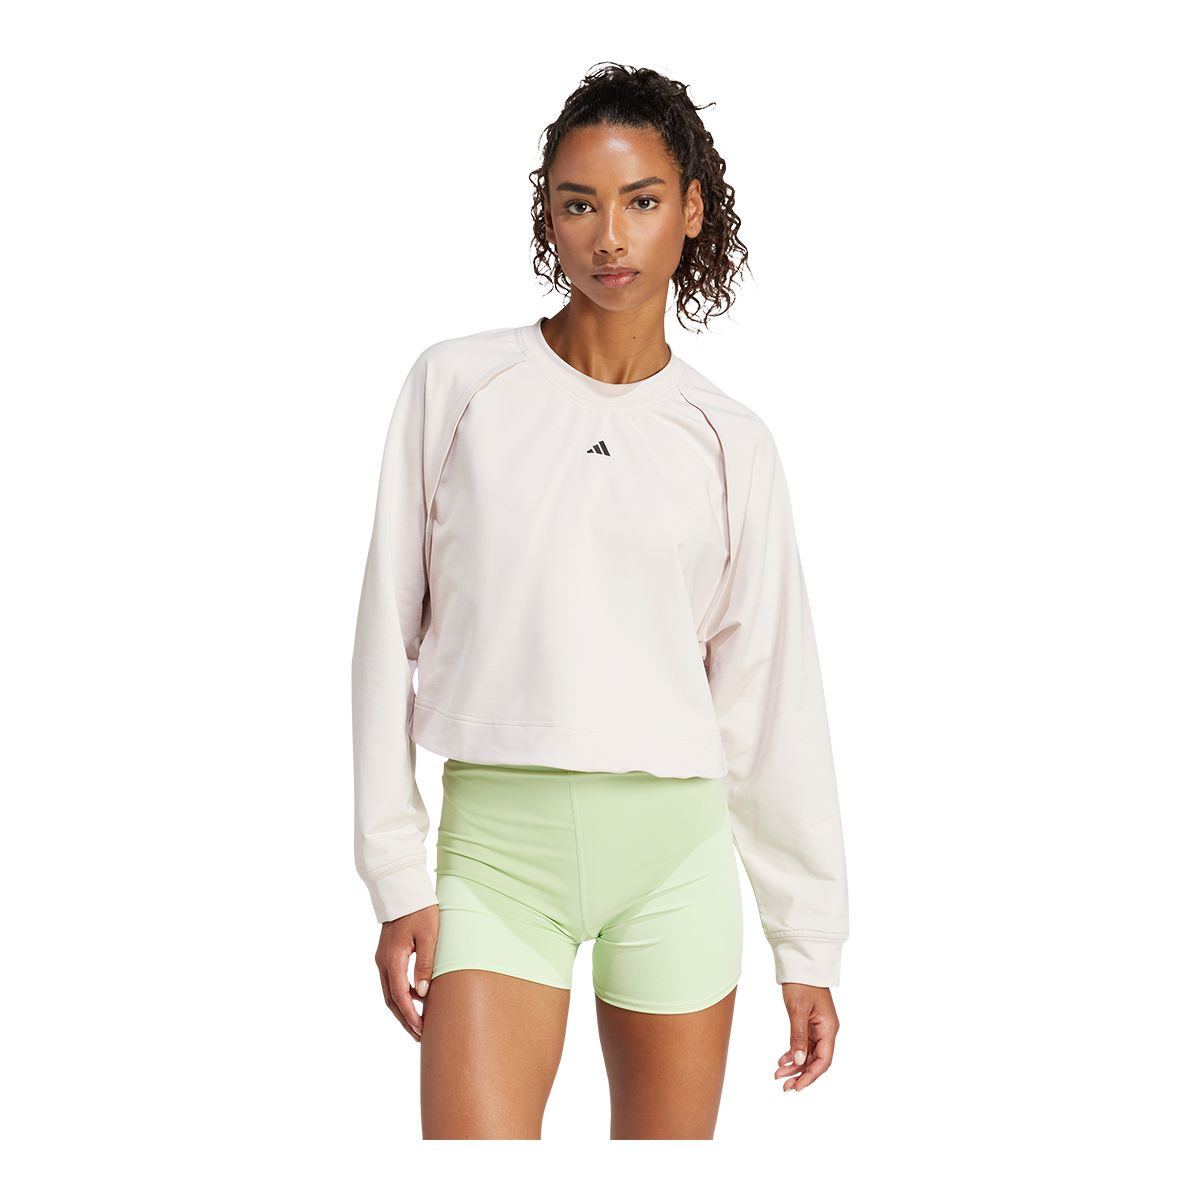 Image of adidas Women's Power Cover Up Long Sleeve Shirt